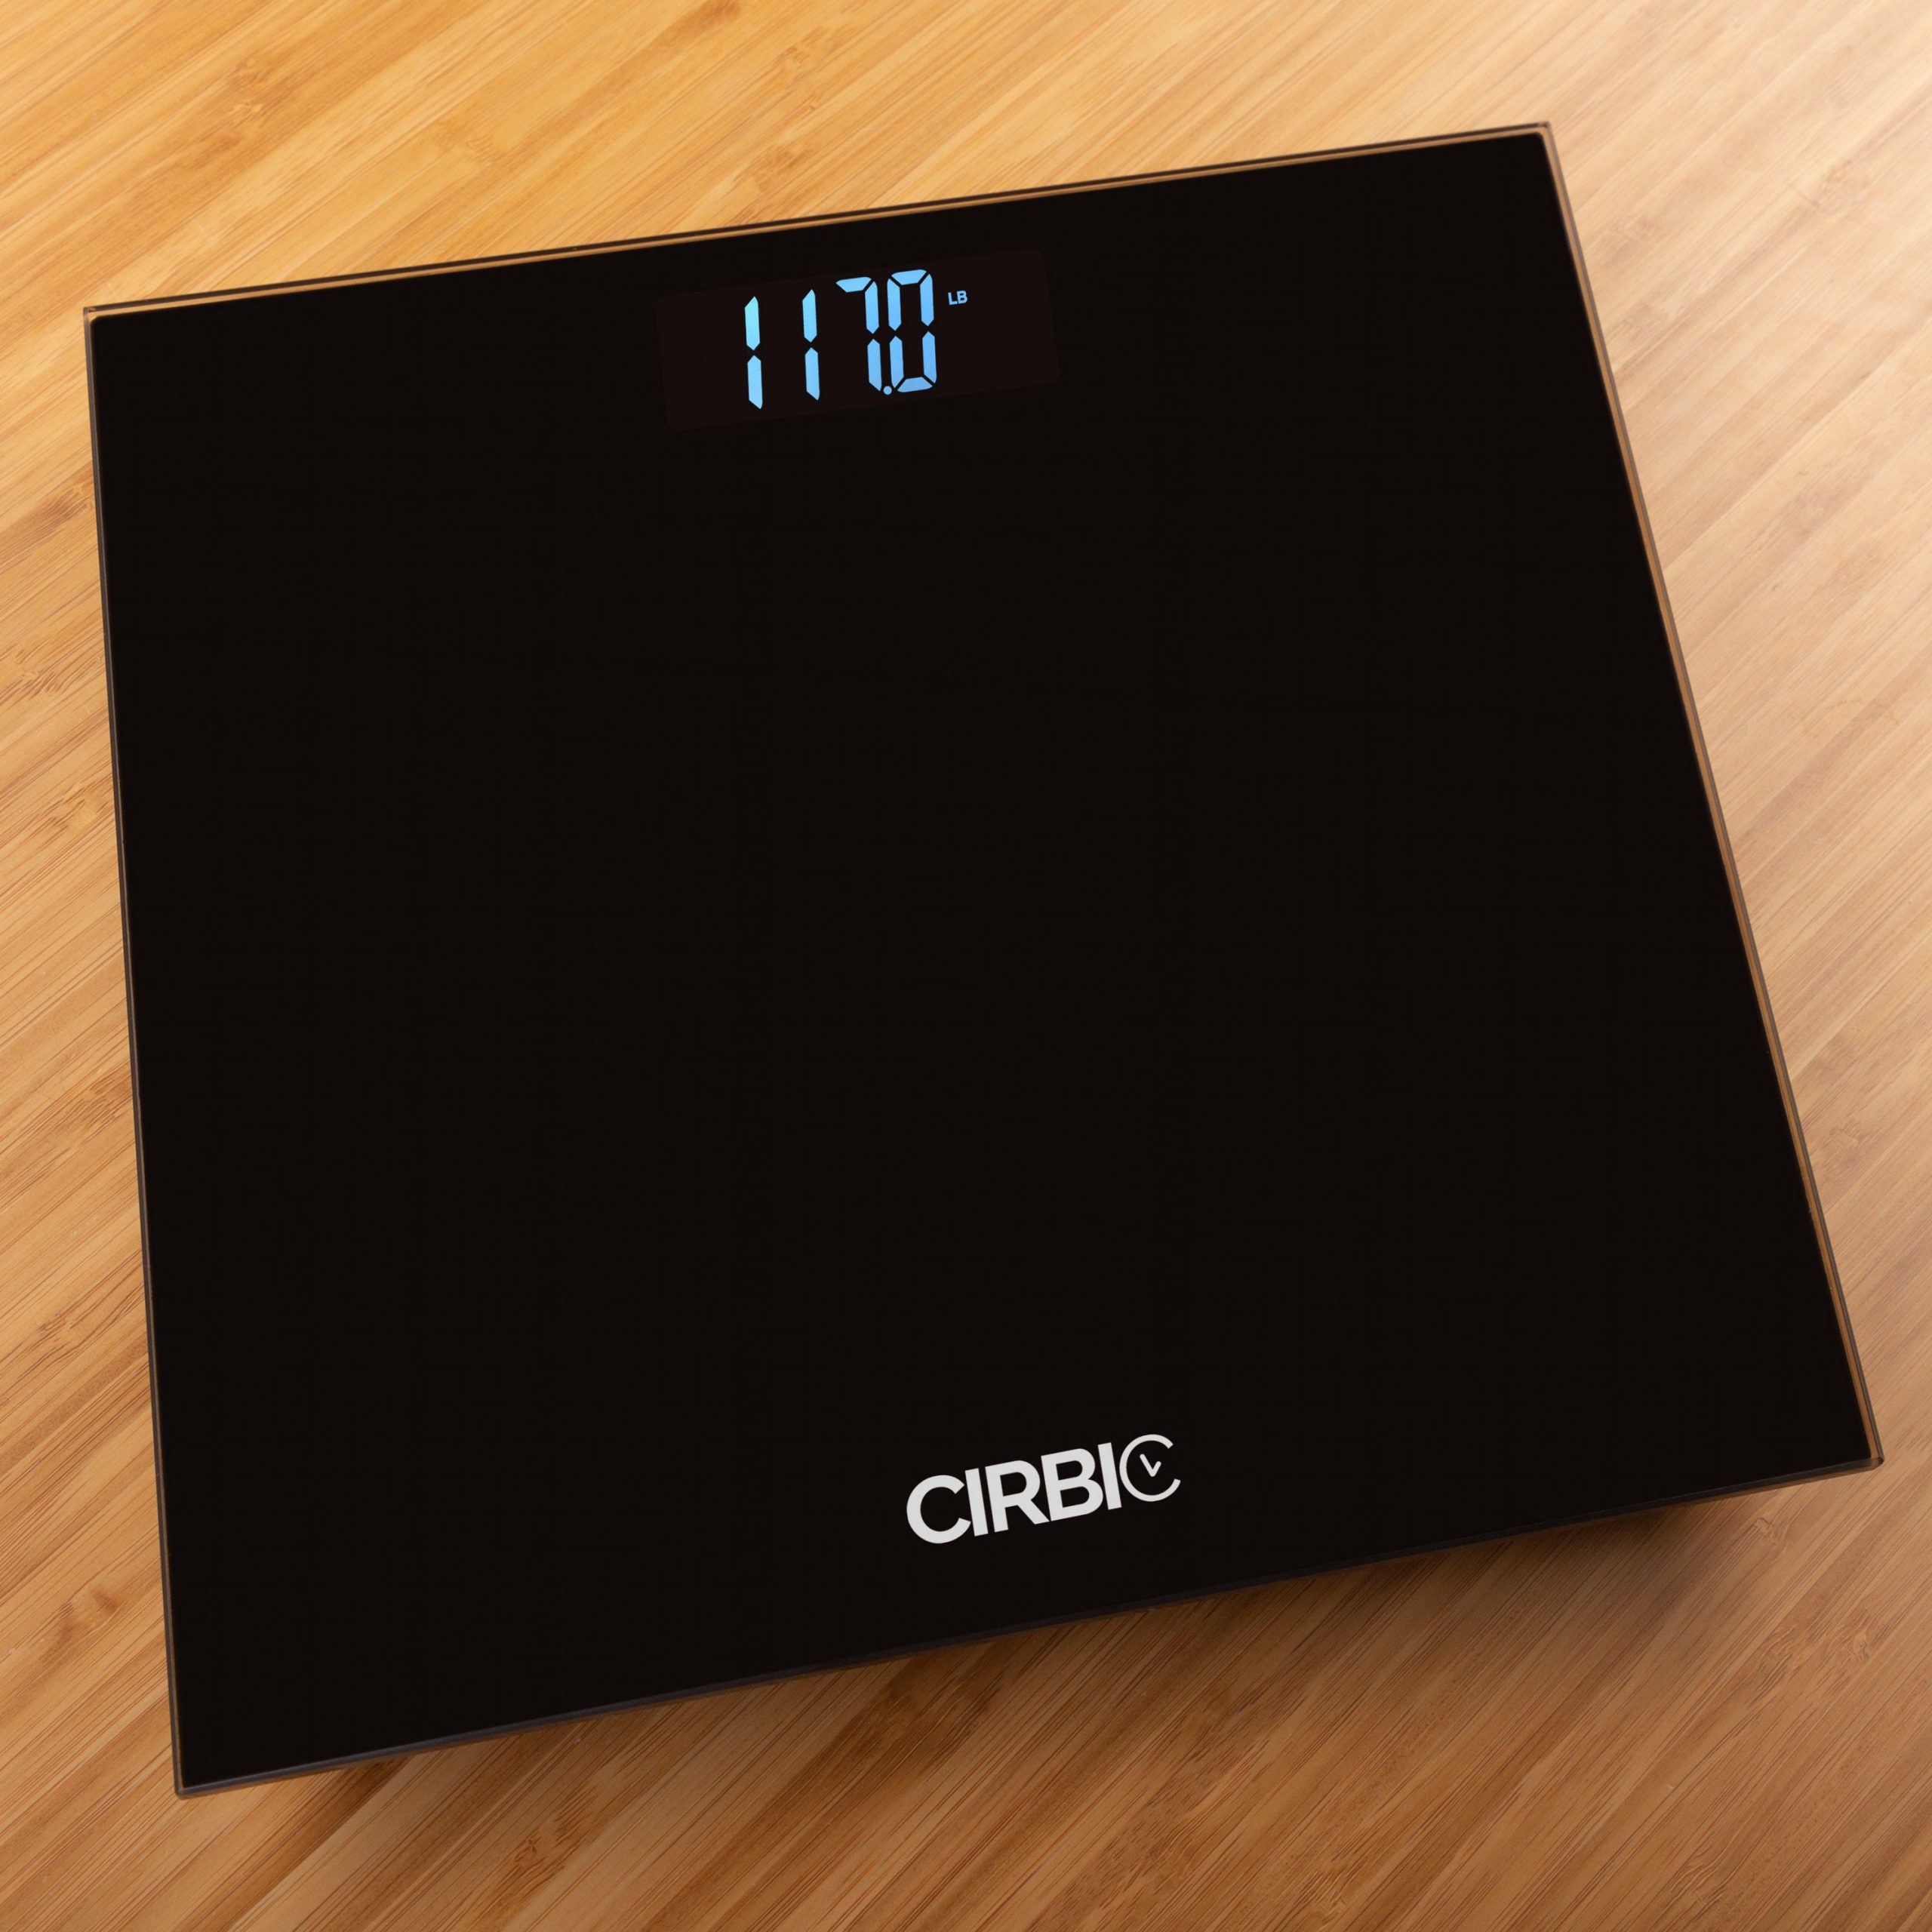 Talking Scales – Big Numbers and Clear Loud Voice Announcement of Weigh –  Cirbic – products for visually impaired